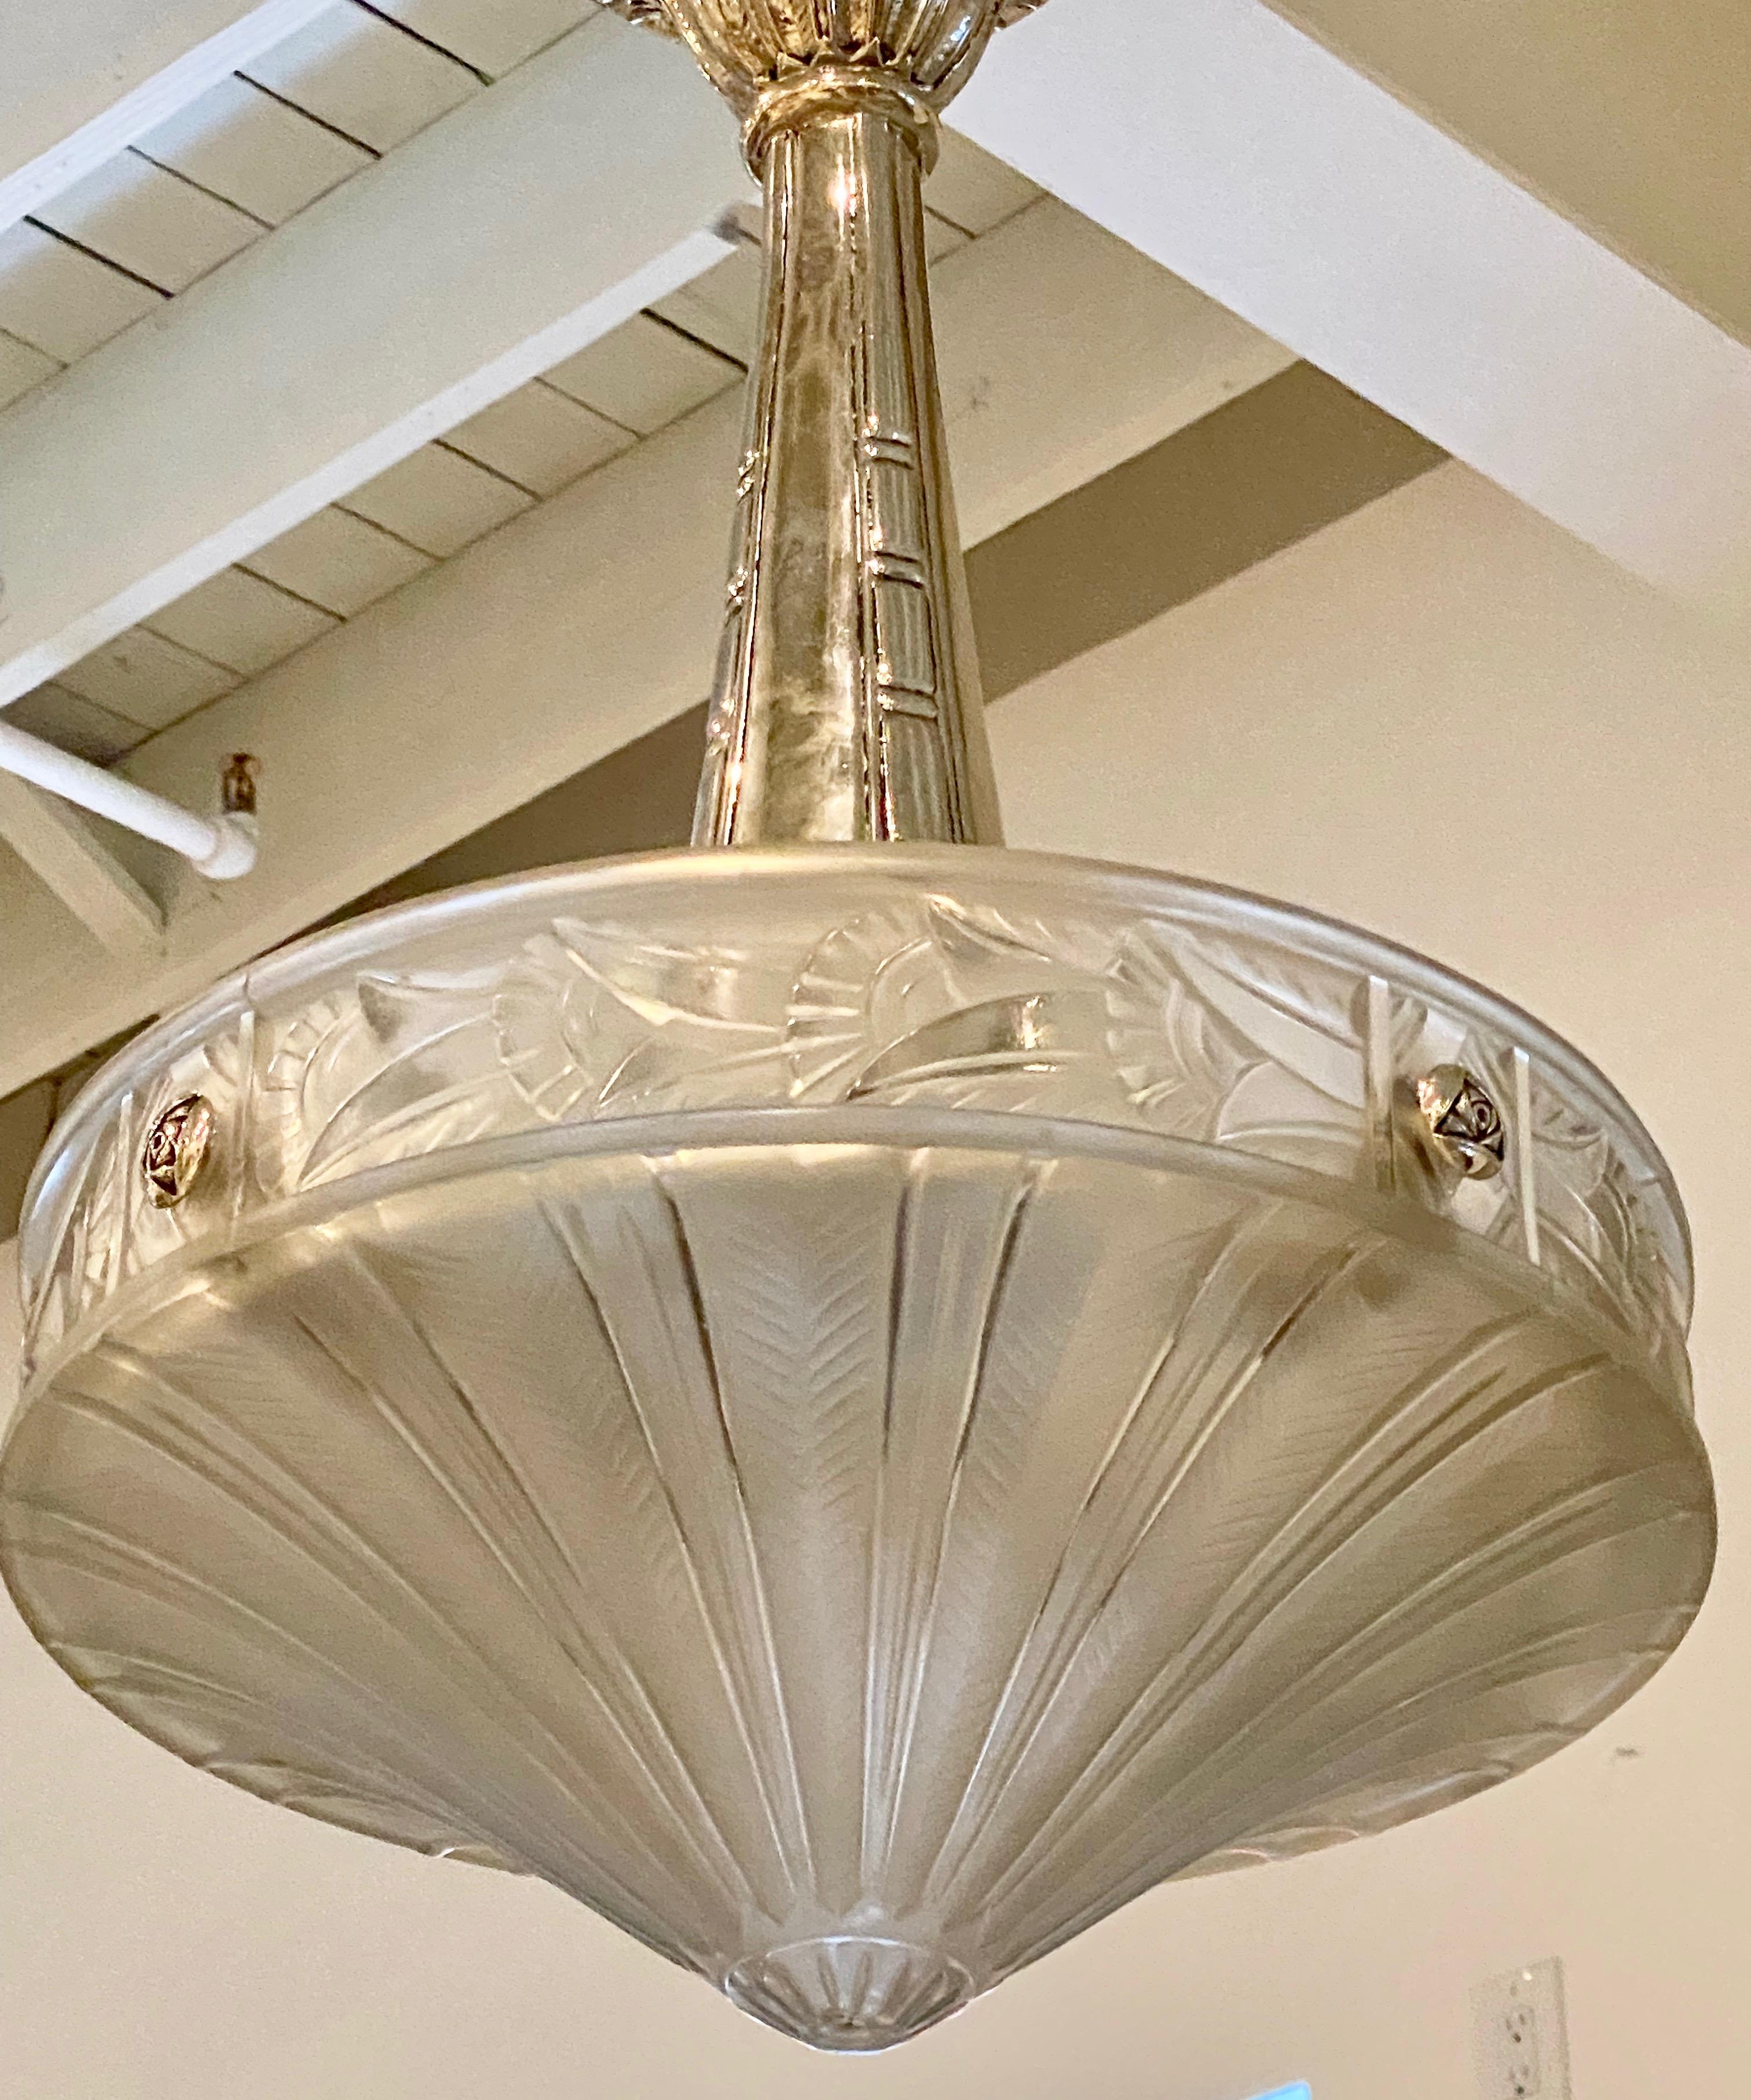 Early 20th Century French Art Deco Chandelier Signed by Lorrain Nancy France For Sale